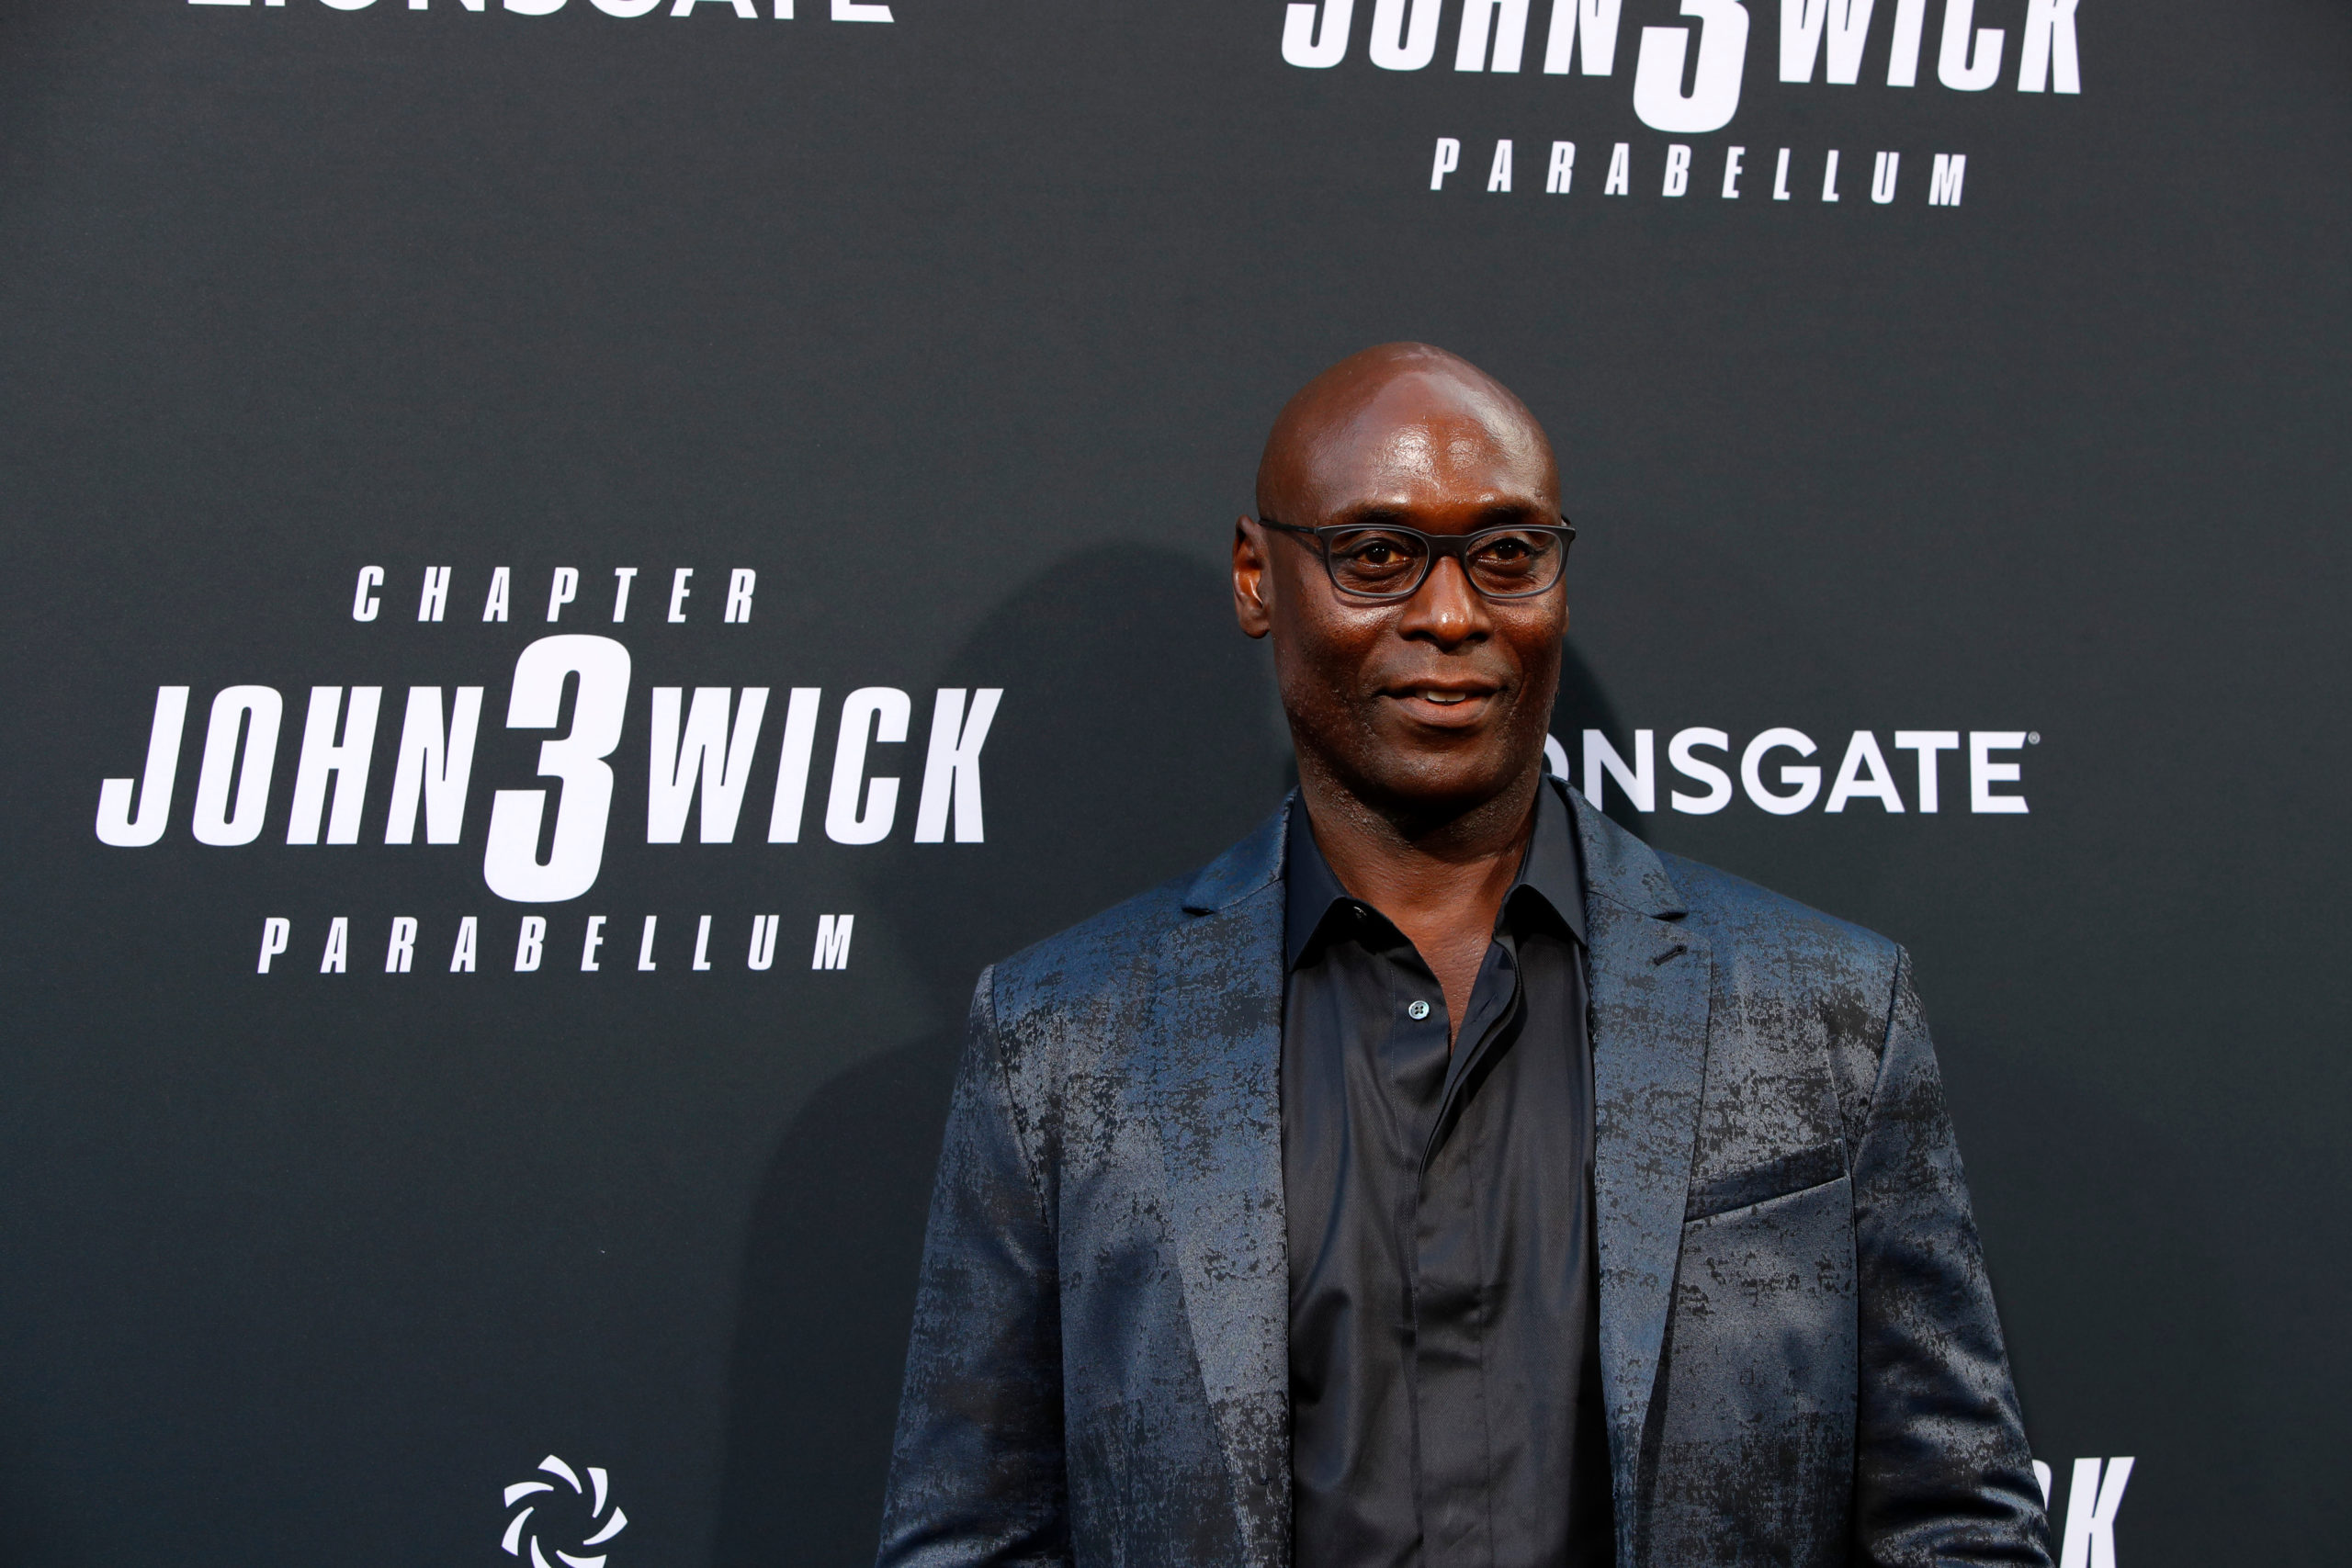 Lance Reddick's Official Cause of Death Revealed | Lance Reddick, who is best known for his roles in The Wire and the John Wick franchise, suddenly passed away on March 17 at his home in Los Angeles, California.